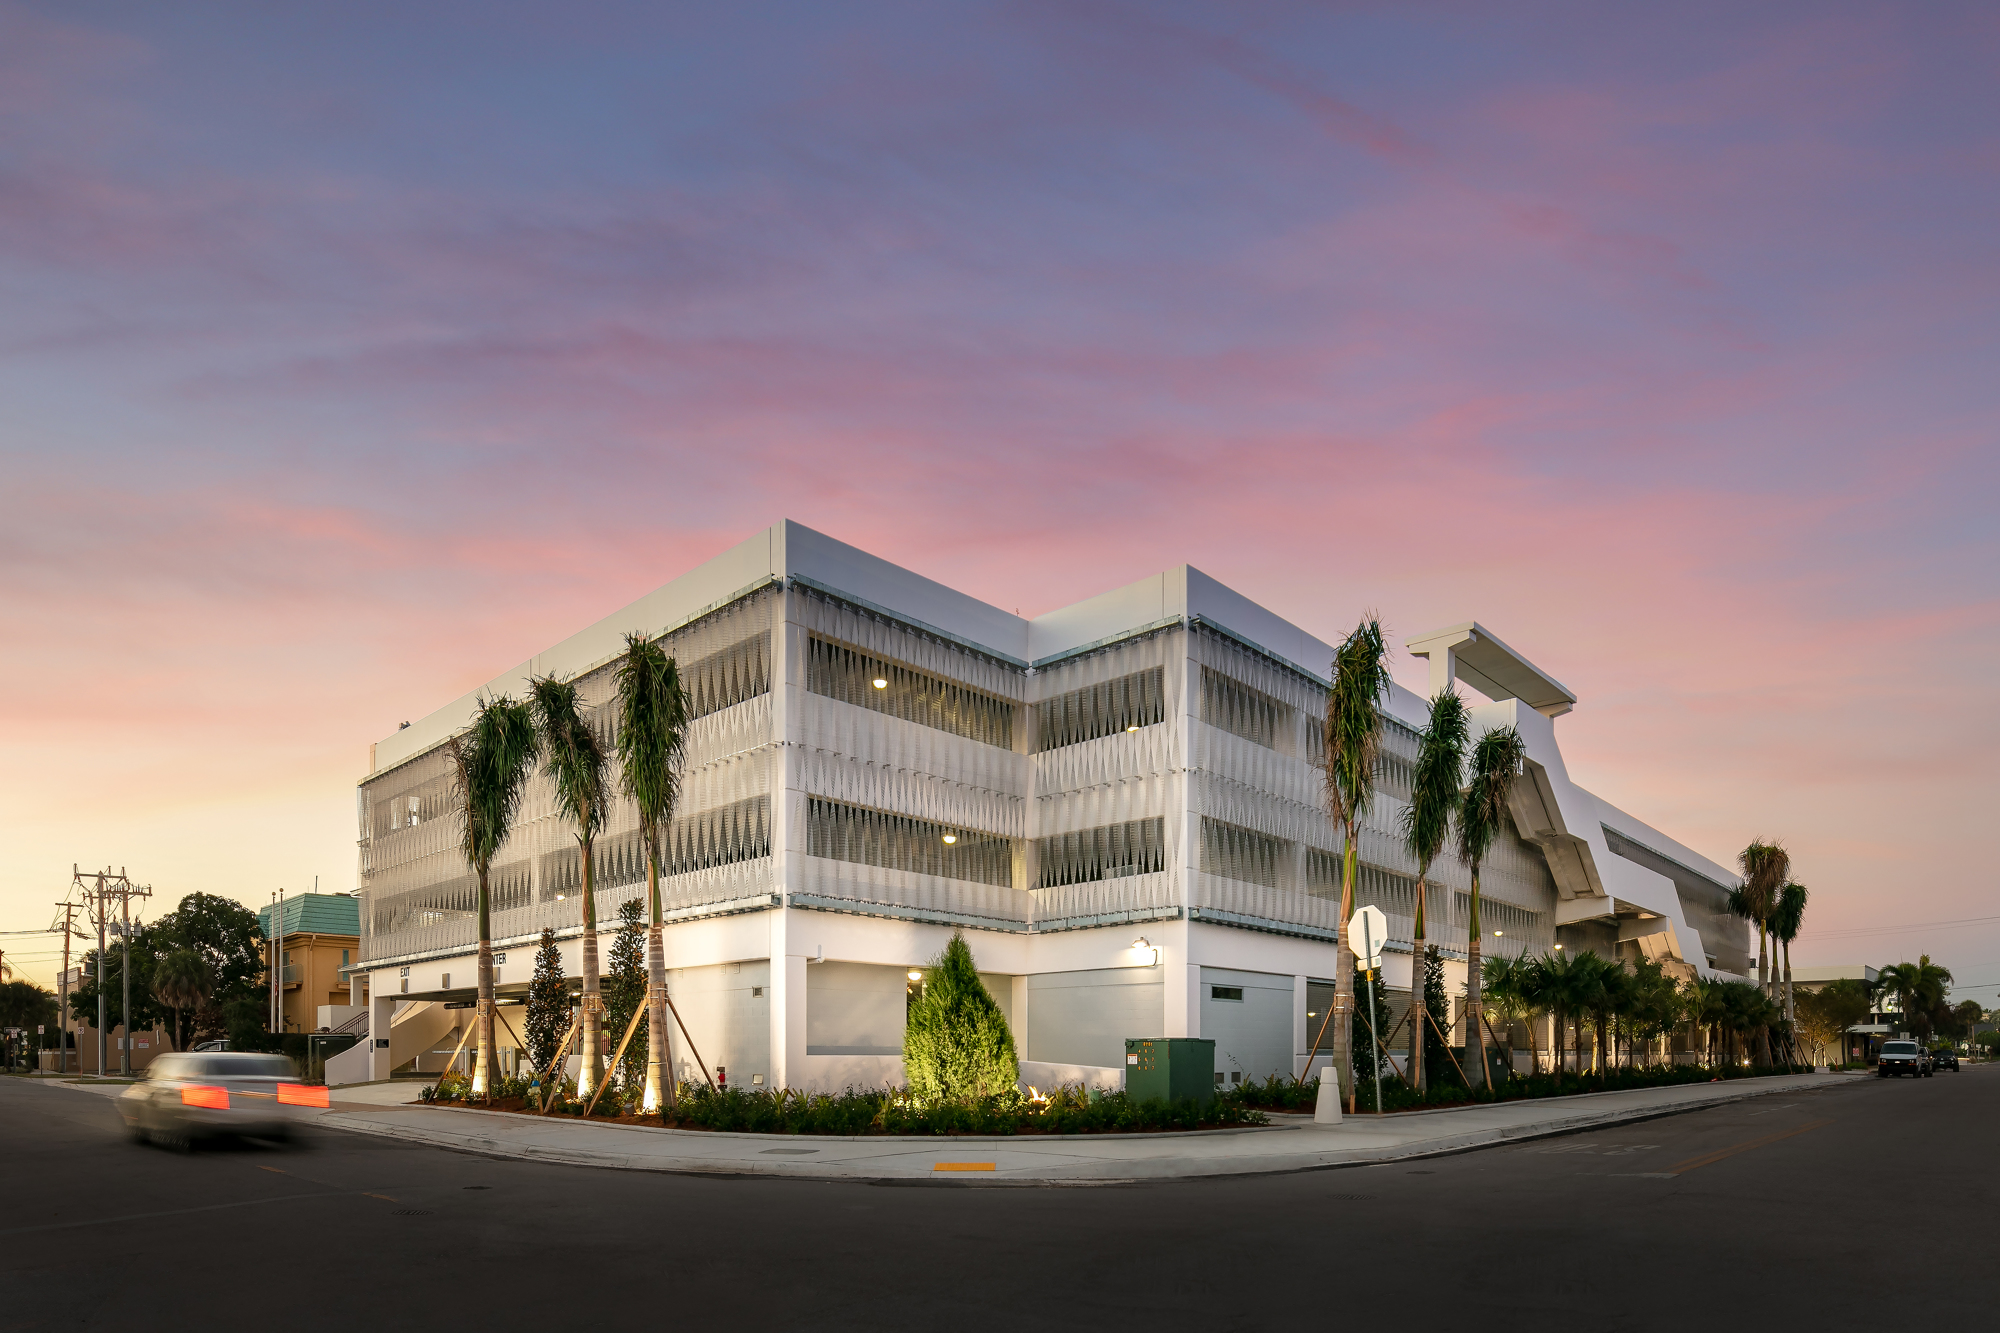 Courtesy, Jon F. Swift Construction. The St. Armands parking garage has 521 parking spaces and is 200,000 square feet.